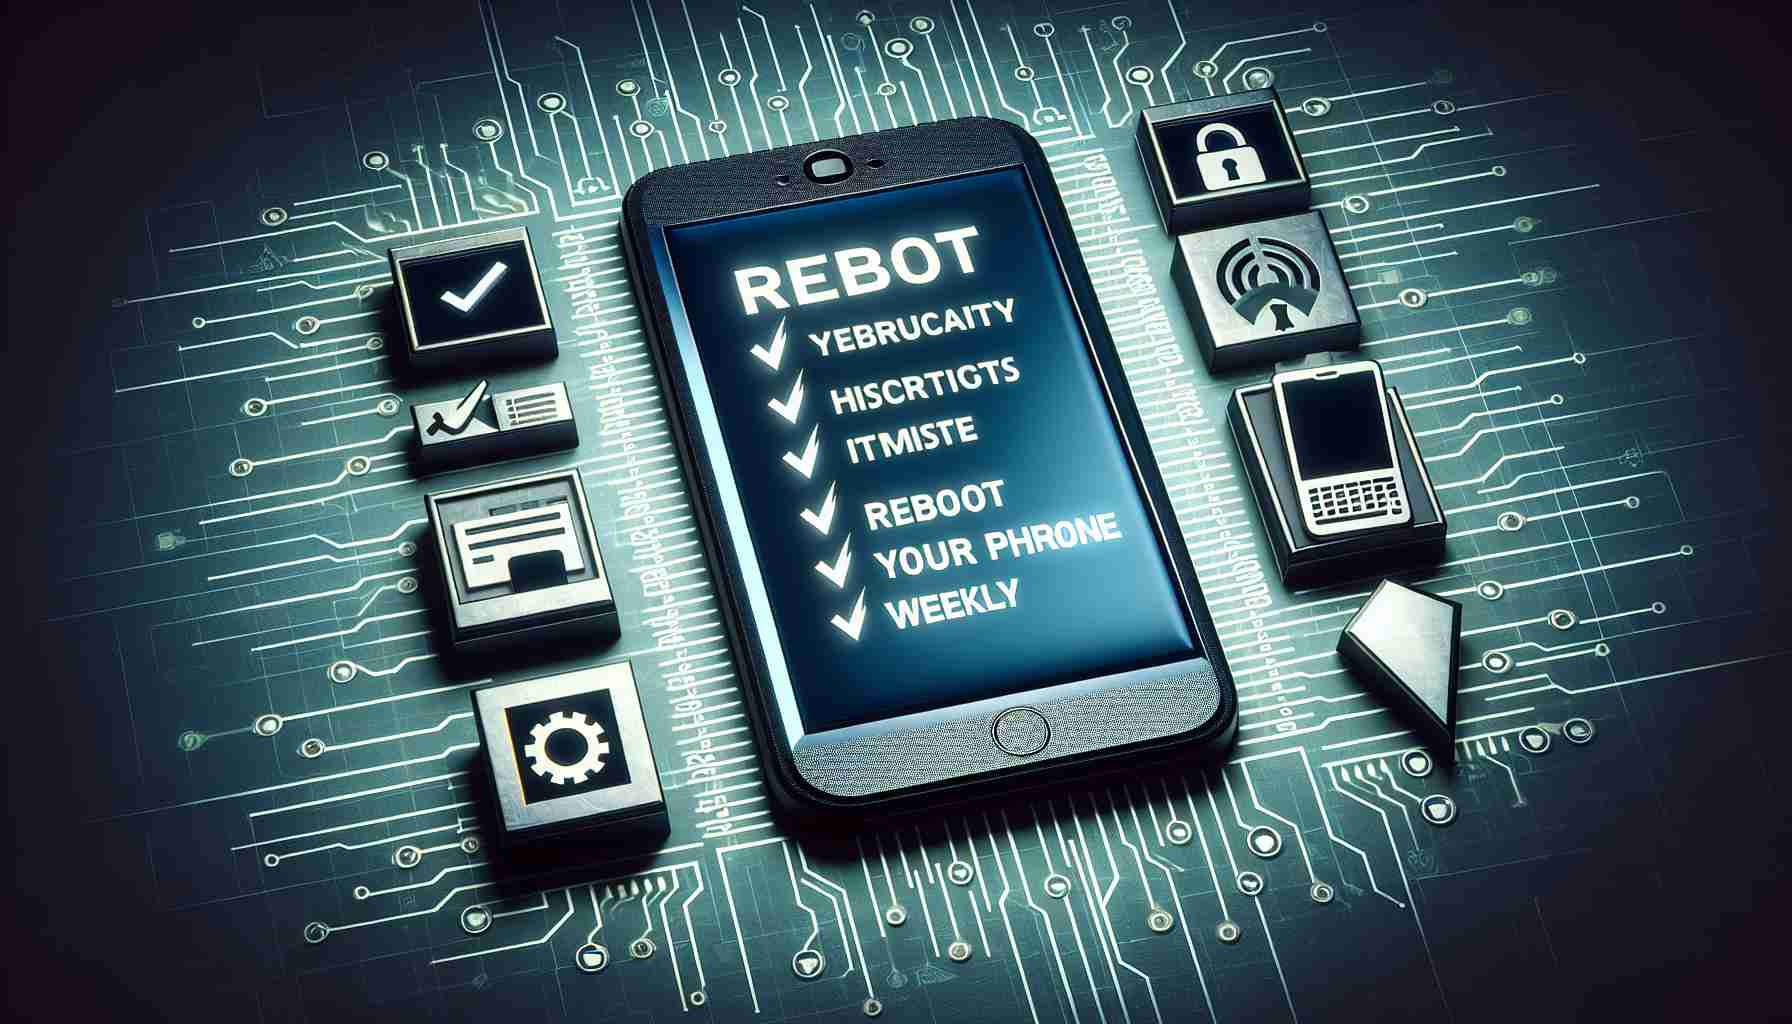 Cybersecurity Tips: Reboot Your Phone Weekly, suggests NSA